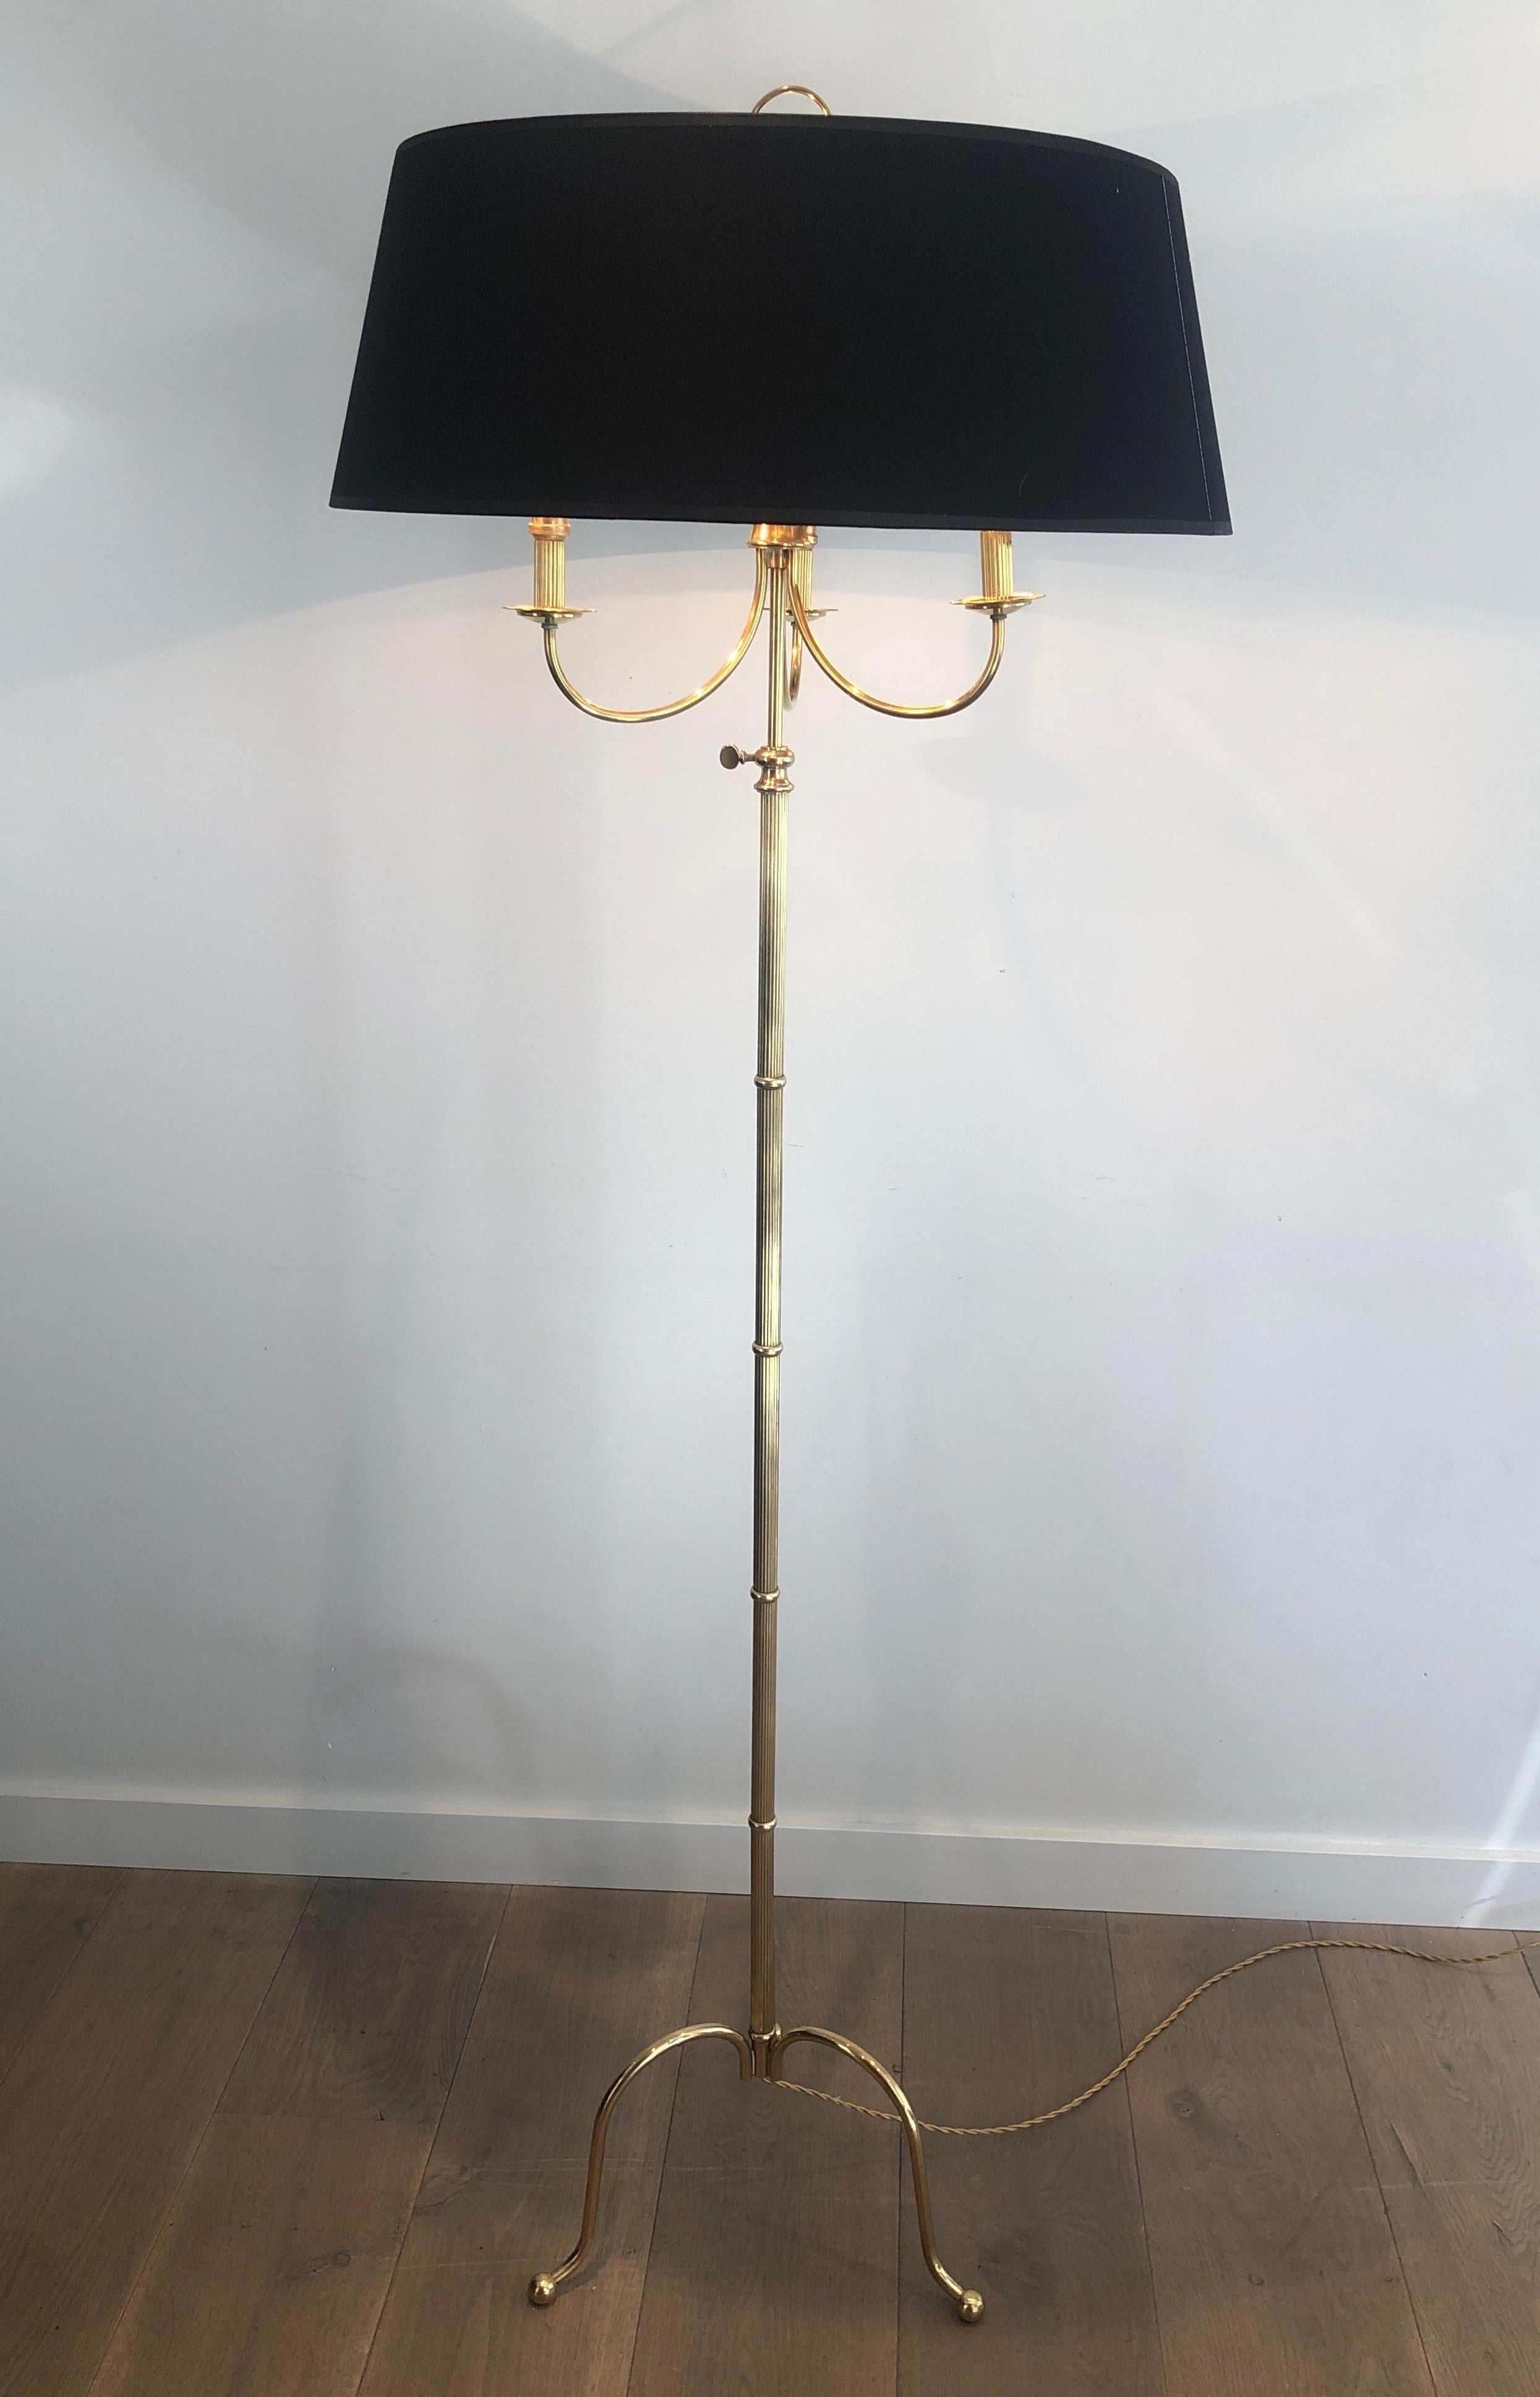 Tripode Brass Floor Lamp with 3 Arms, French Work by Maison Jansen For Sale 7